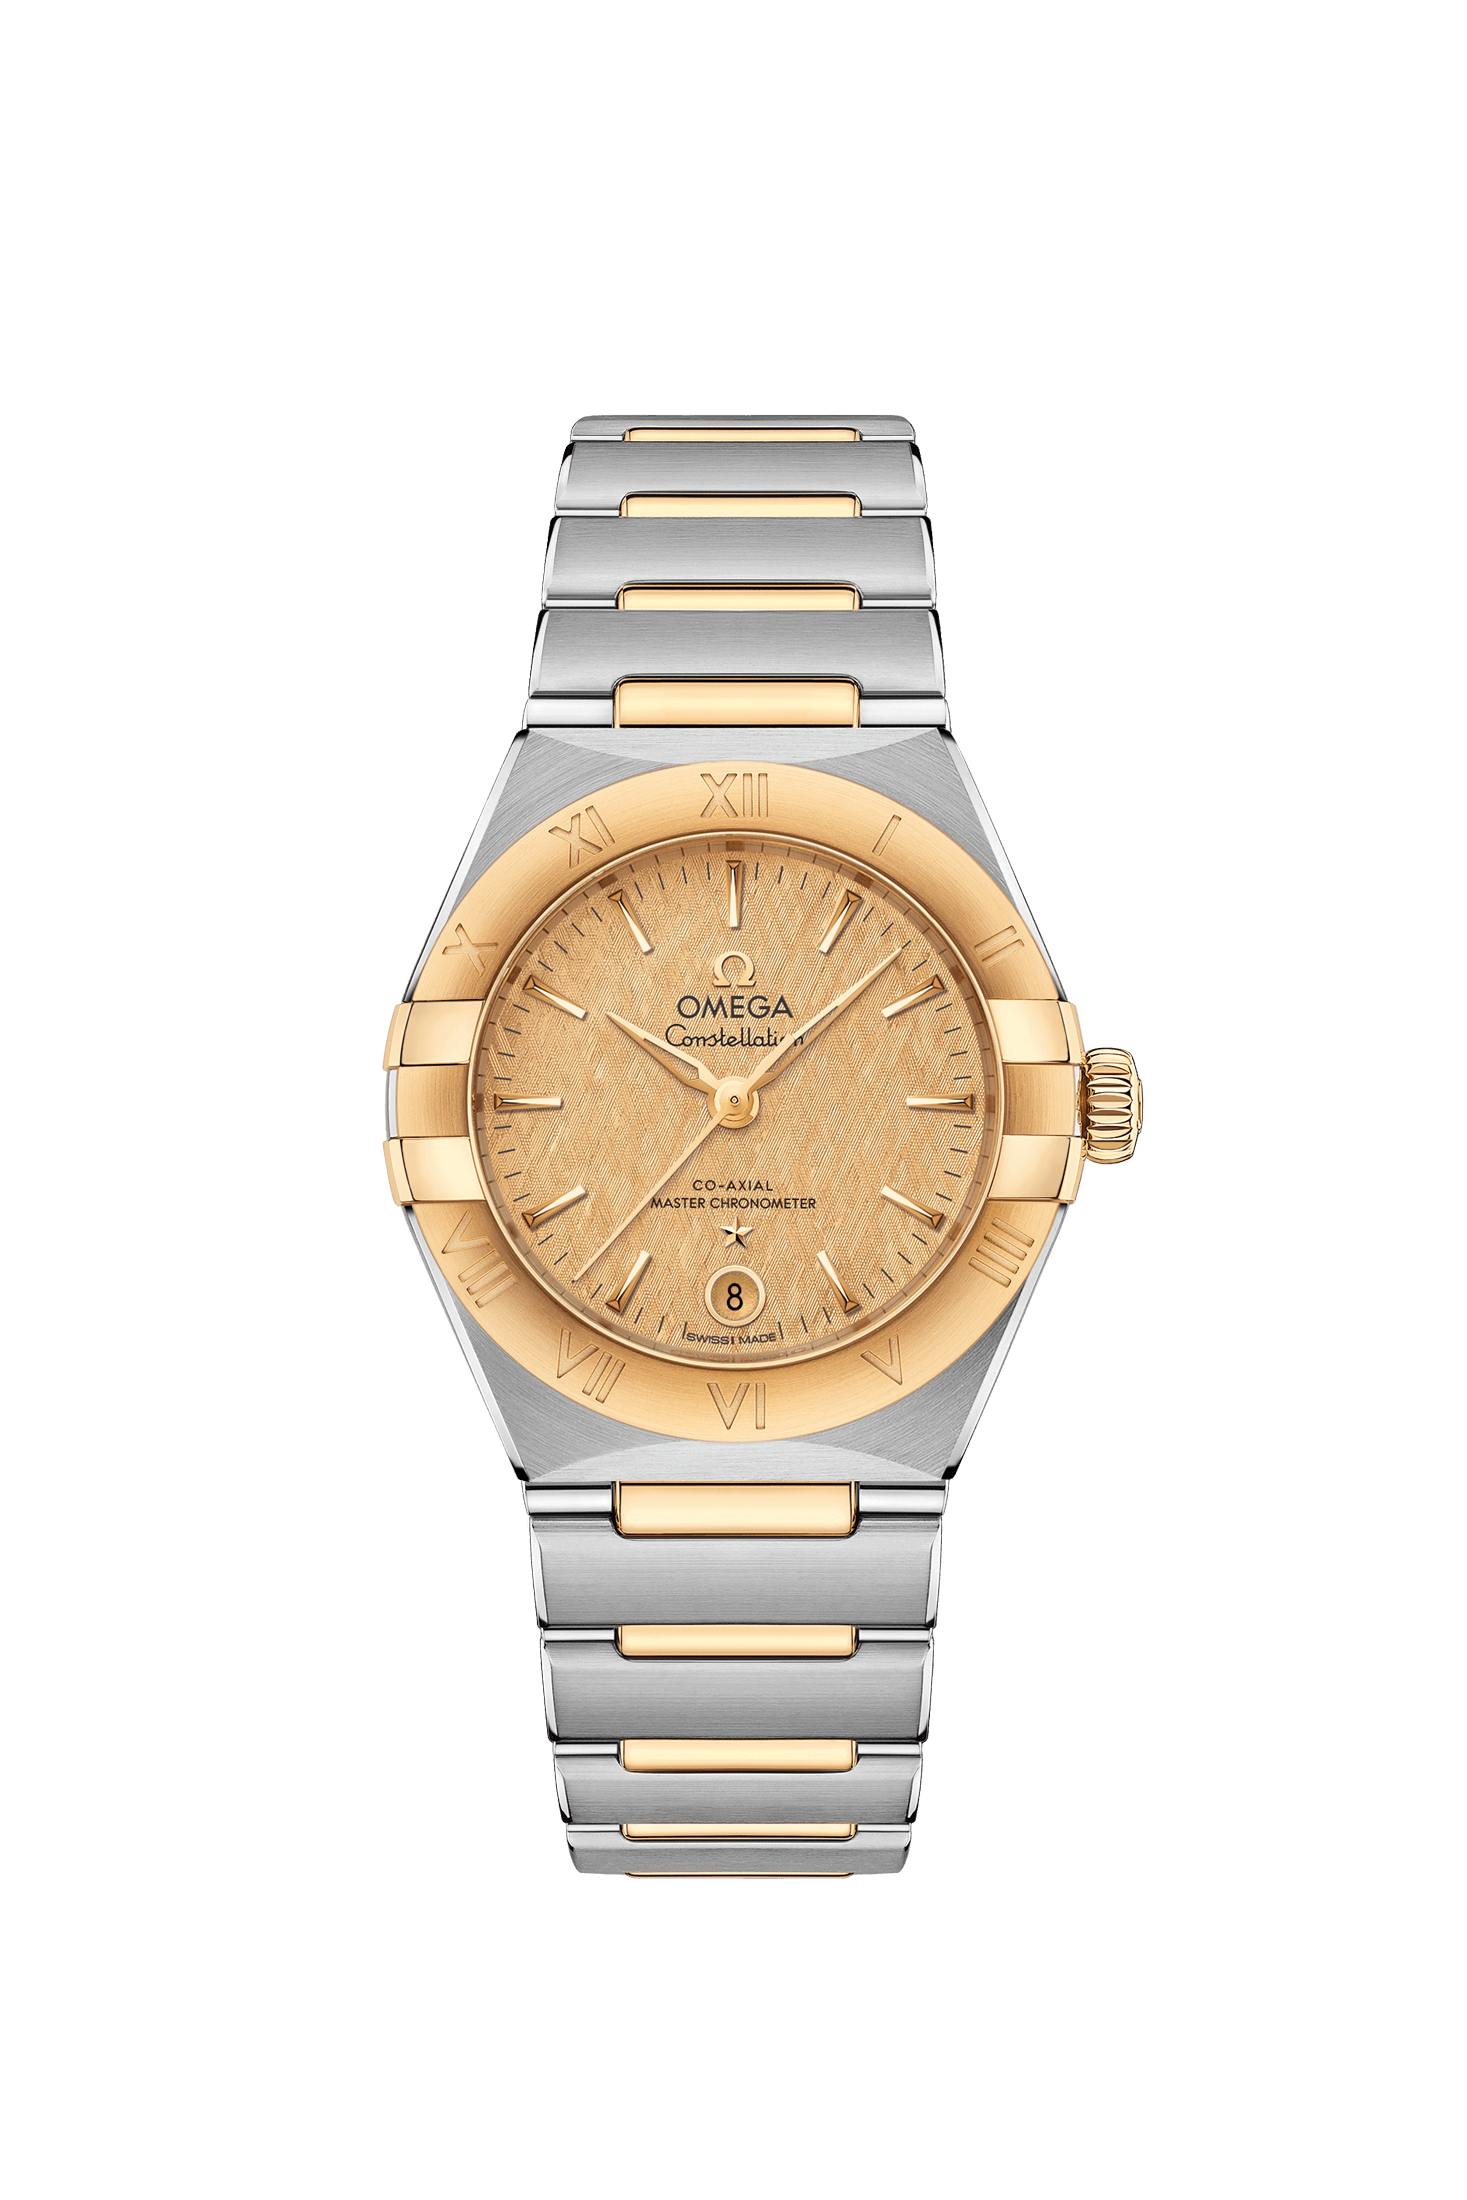 Ladies' watch  OMEGA, Constellation Co Axial Master Chronometer / 29mm, SKU: 131.20.29.20.08.001 | watchapproach.com